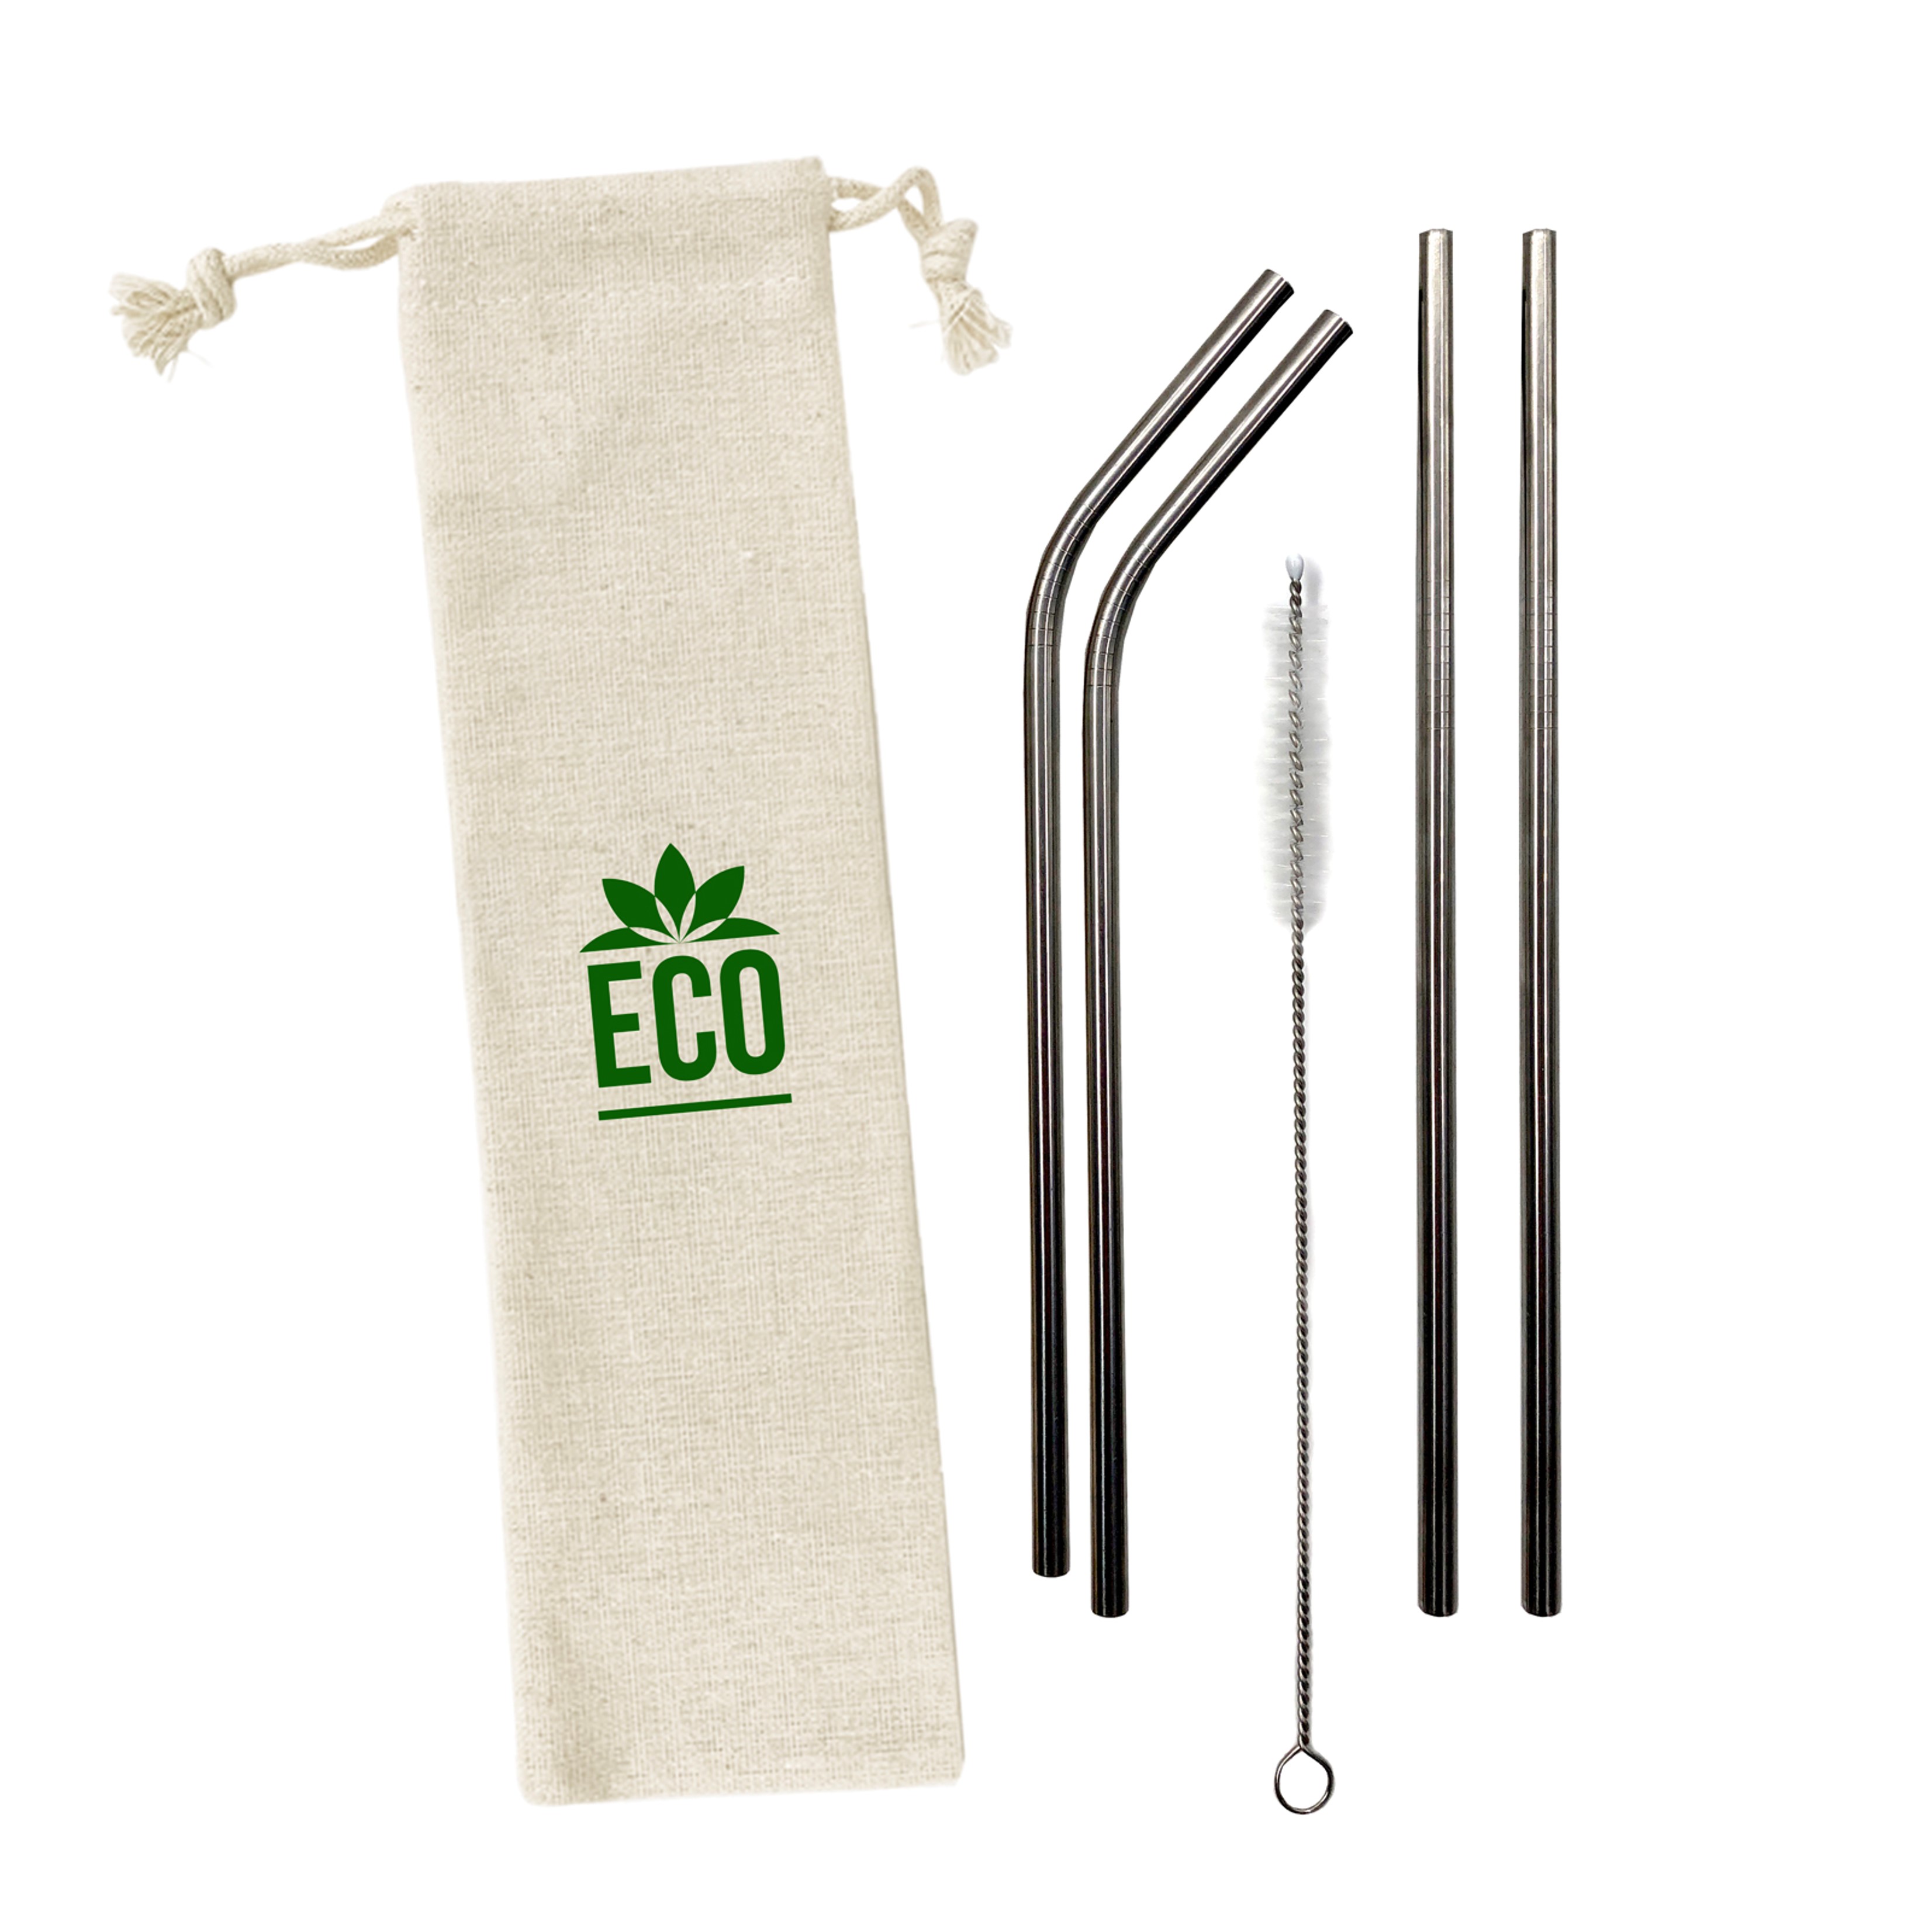 Stainless Steel Straw Set In Custom Pouch - 4 Straws & Cleaner